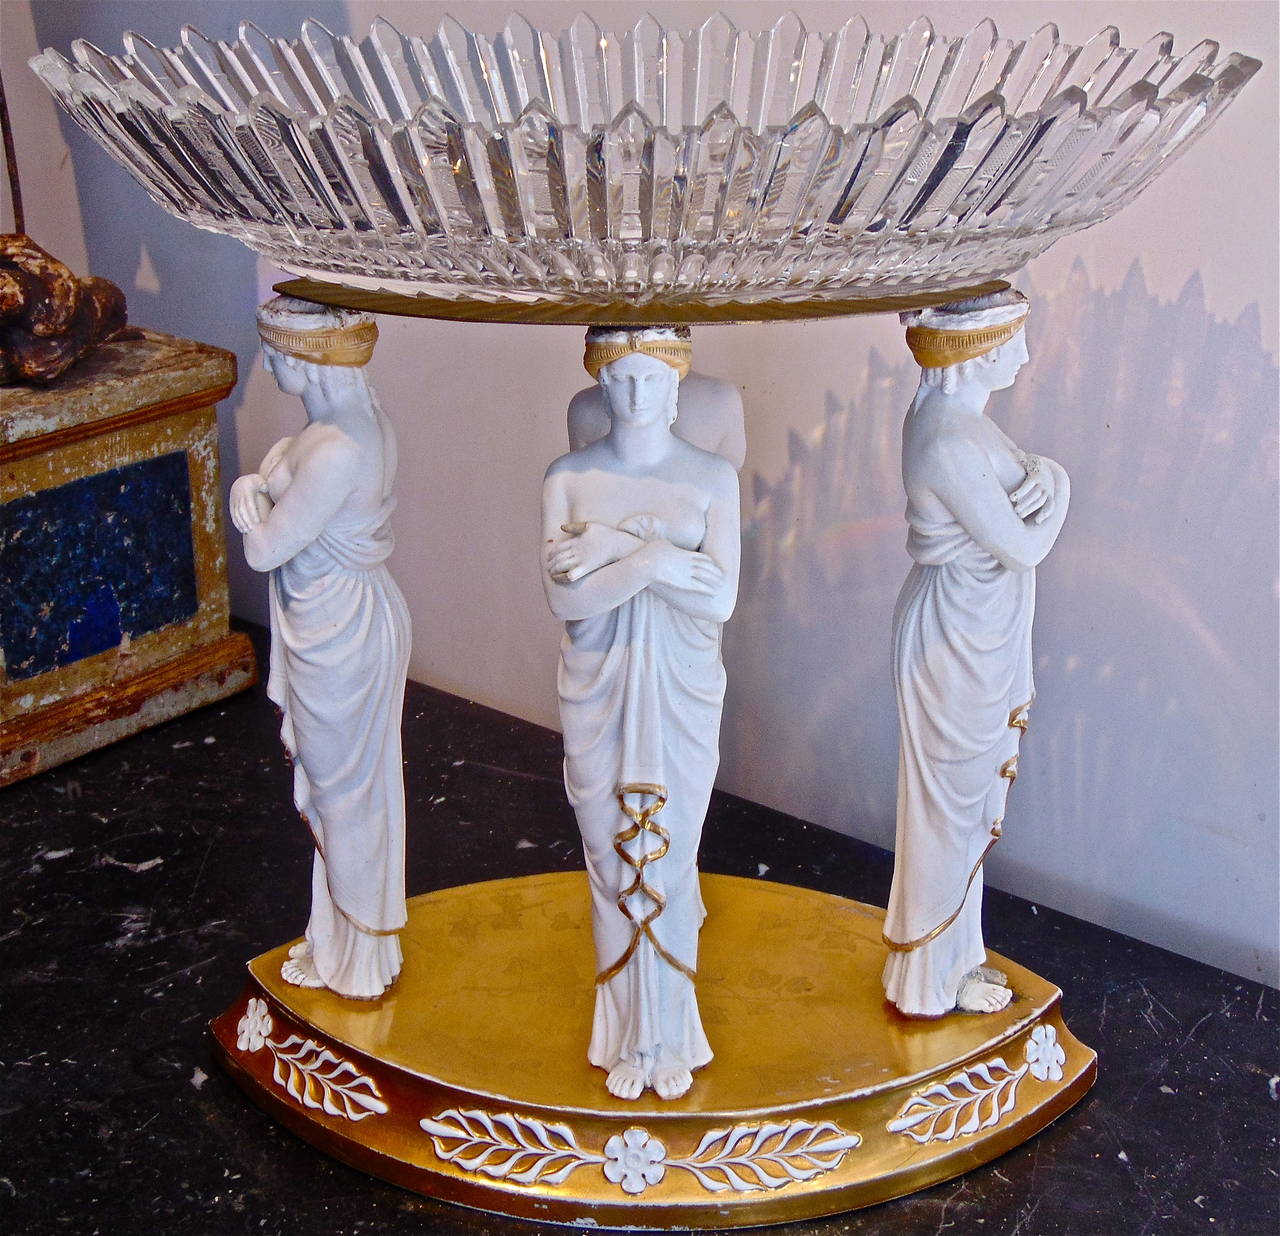 Period Early 19th Century Sevres Gilt and Bisquit Porcelain Centerpiece

--Gilt and Bisque Neoclassical Caryatid Form 
--Now with Cut Crystal Basket
--Exquisite